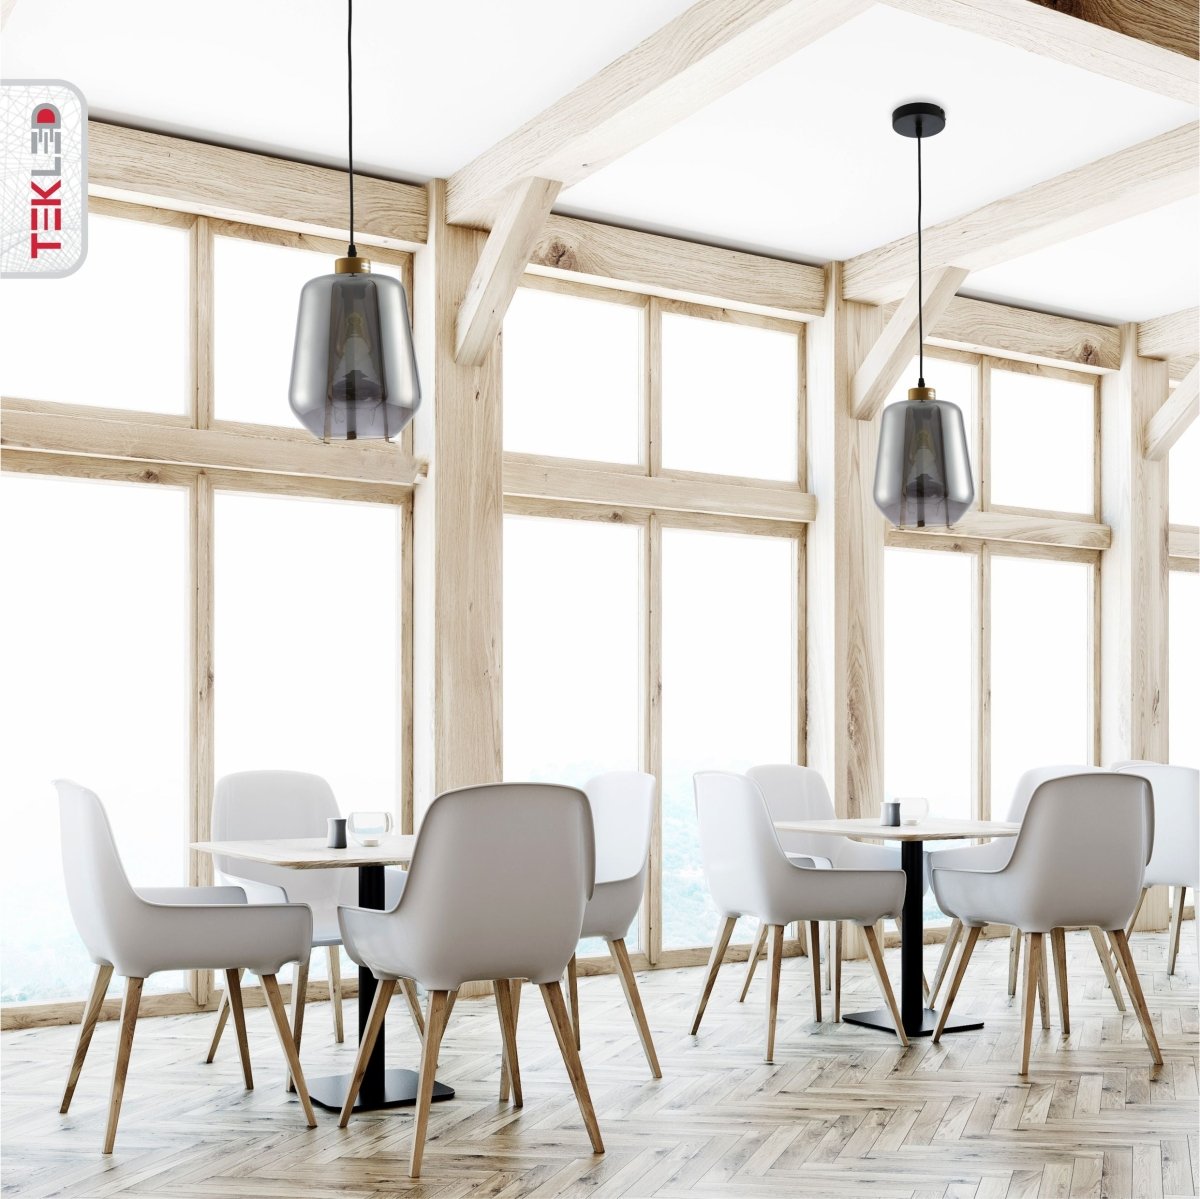 More interior usage of Smoky Glass Schoolhouse Pendant Light with E27 Fitting | TEKLED 159-17348